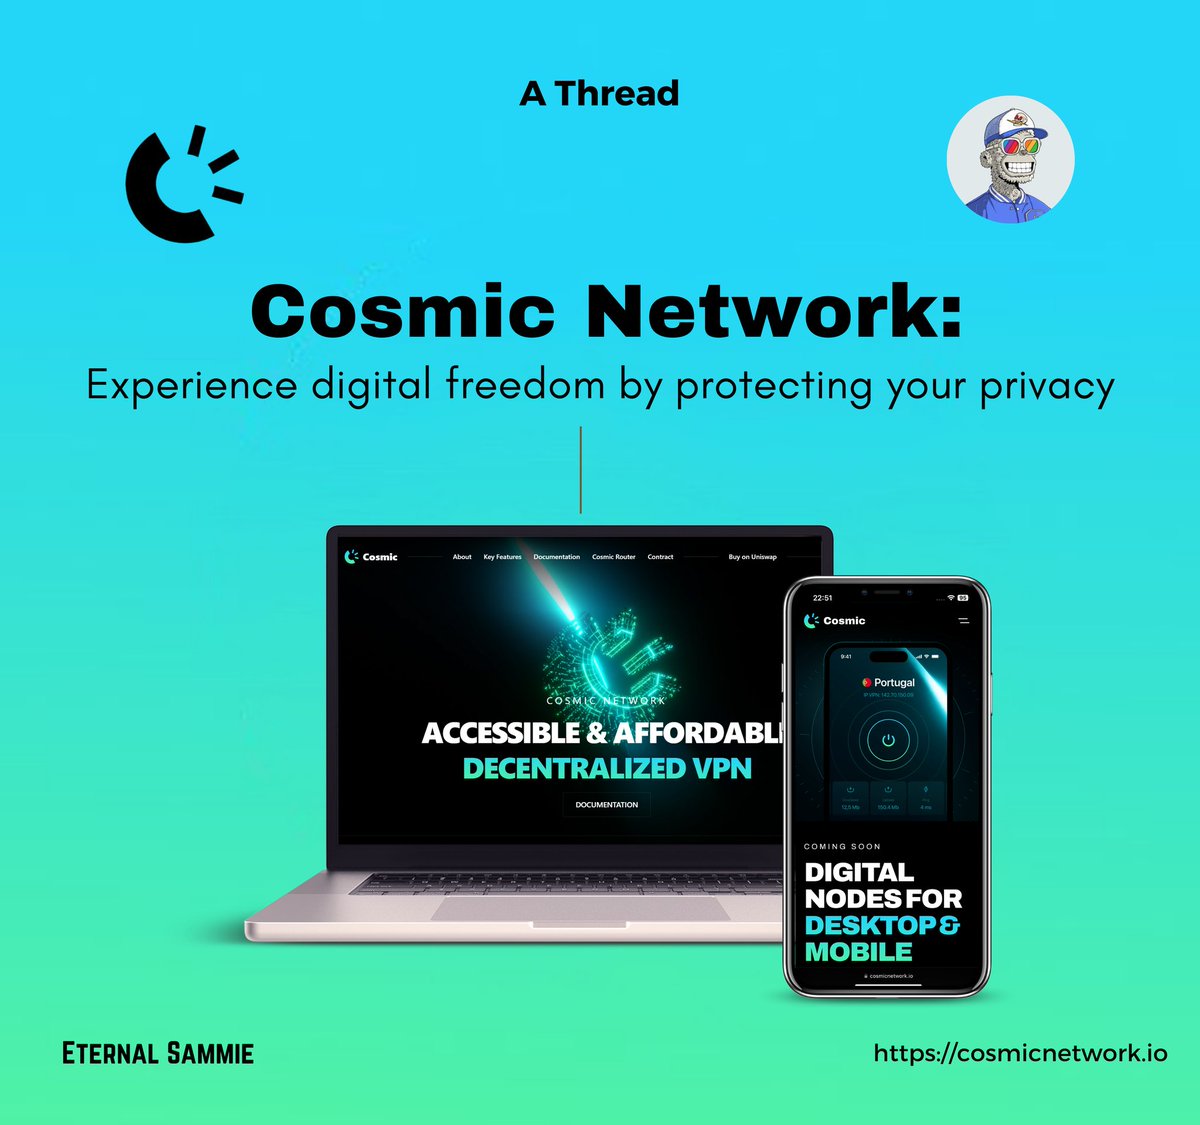 Ava, a journalist exposing corrupt politicians, needed anonymity as traditional VPNs weren't safe. With @Network_Cosmic_, a dVPN with global nodes, she had a glimmer of hope. Just a few clicks, Ava was cloaked. She exposed the truth while maintaining her digital freedom. A 🧵